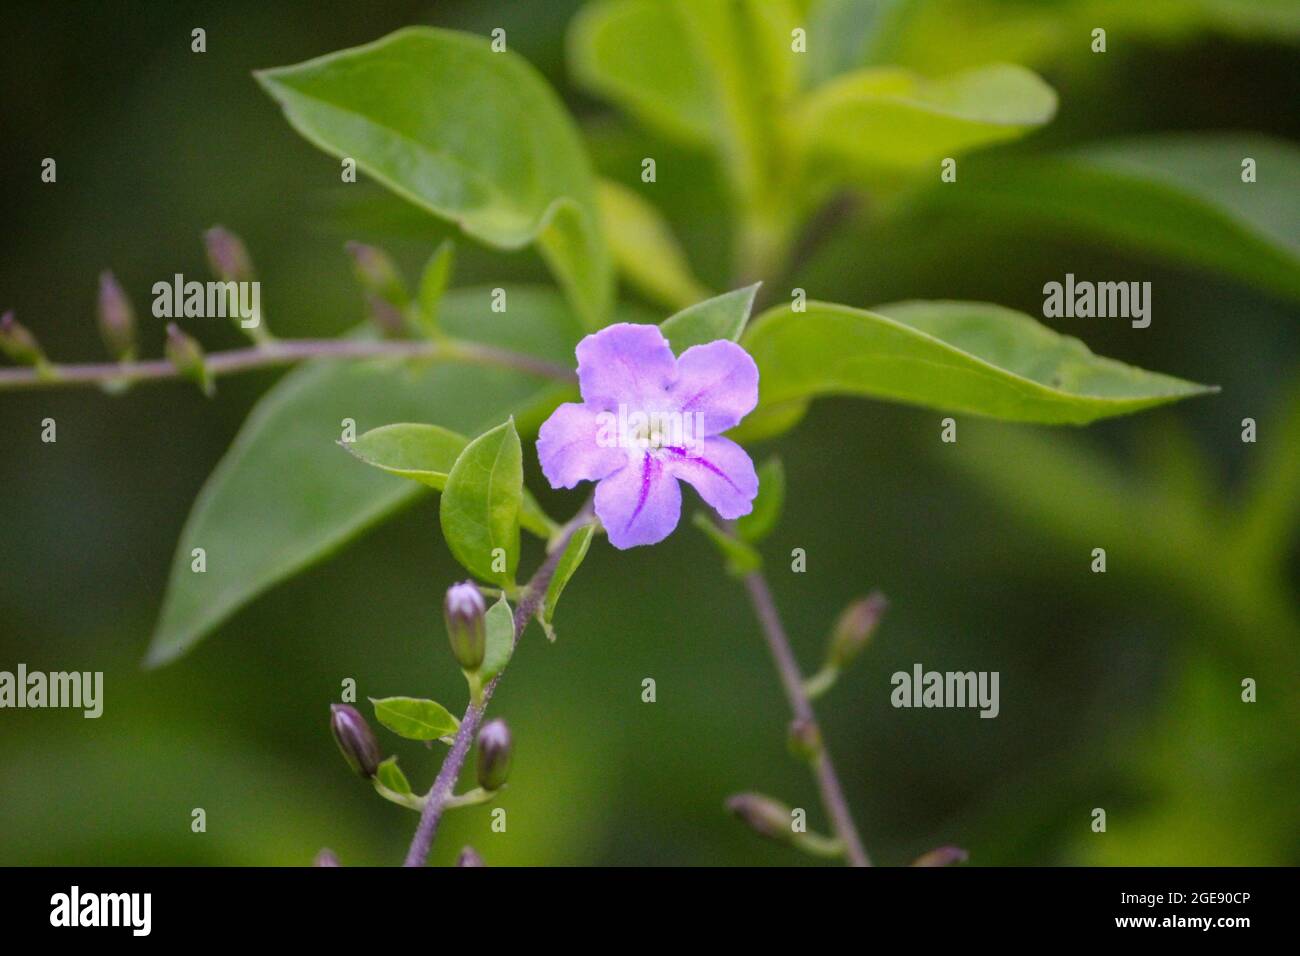 Selective focus of a purple Ruella squarrose flower in the garden Stock Photo